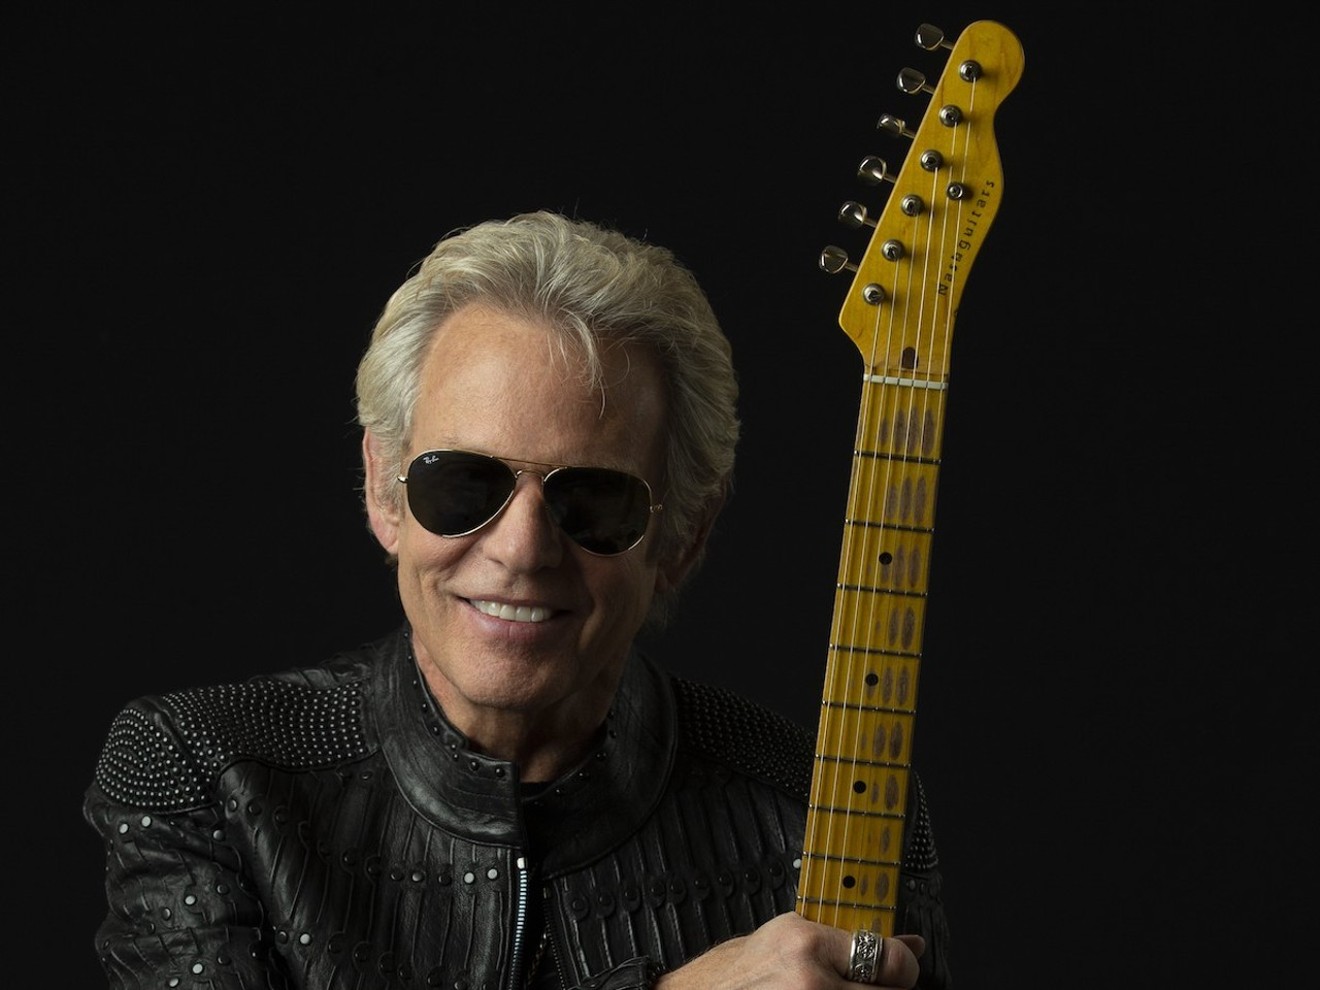 Don Felder will play songs from his new album, along with Eagles classics, at Seminole Casino Coconut Creek.